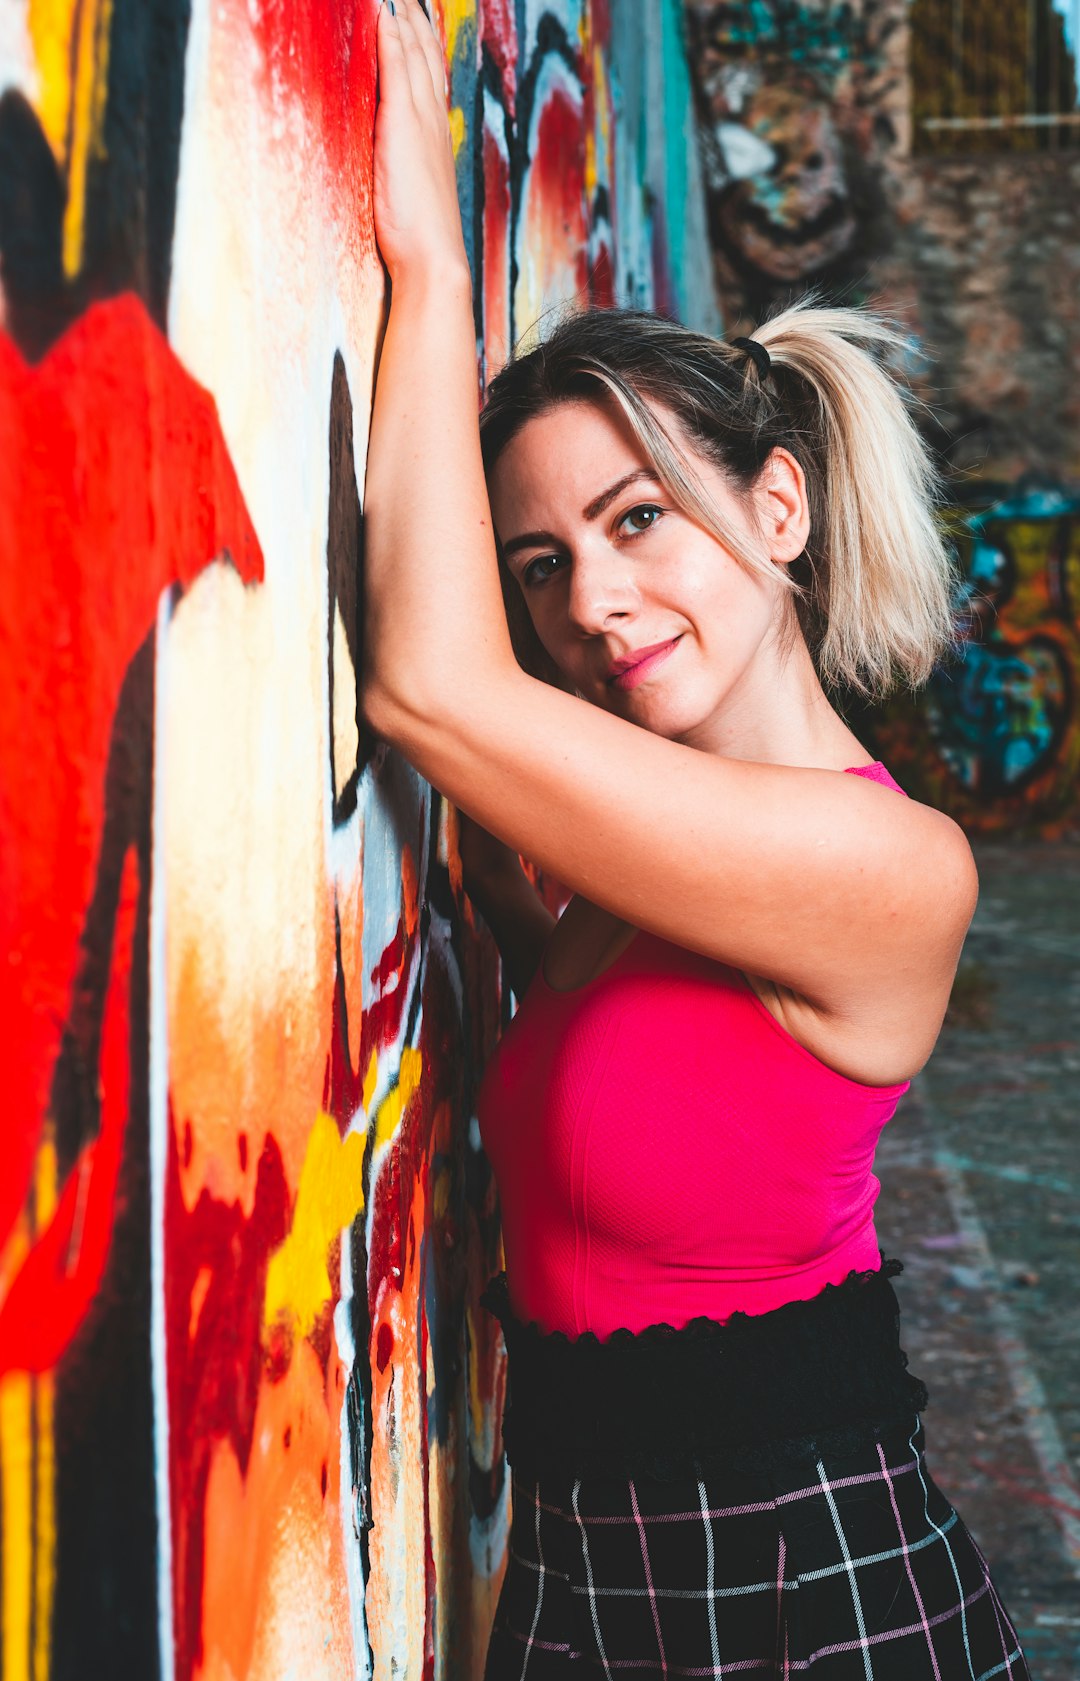 woman in red tank top leaning on wall